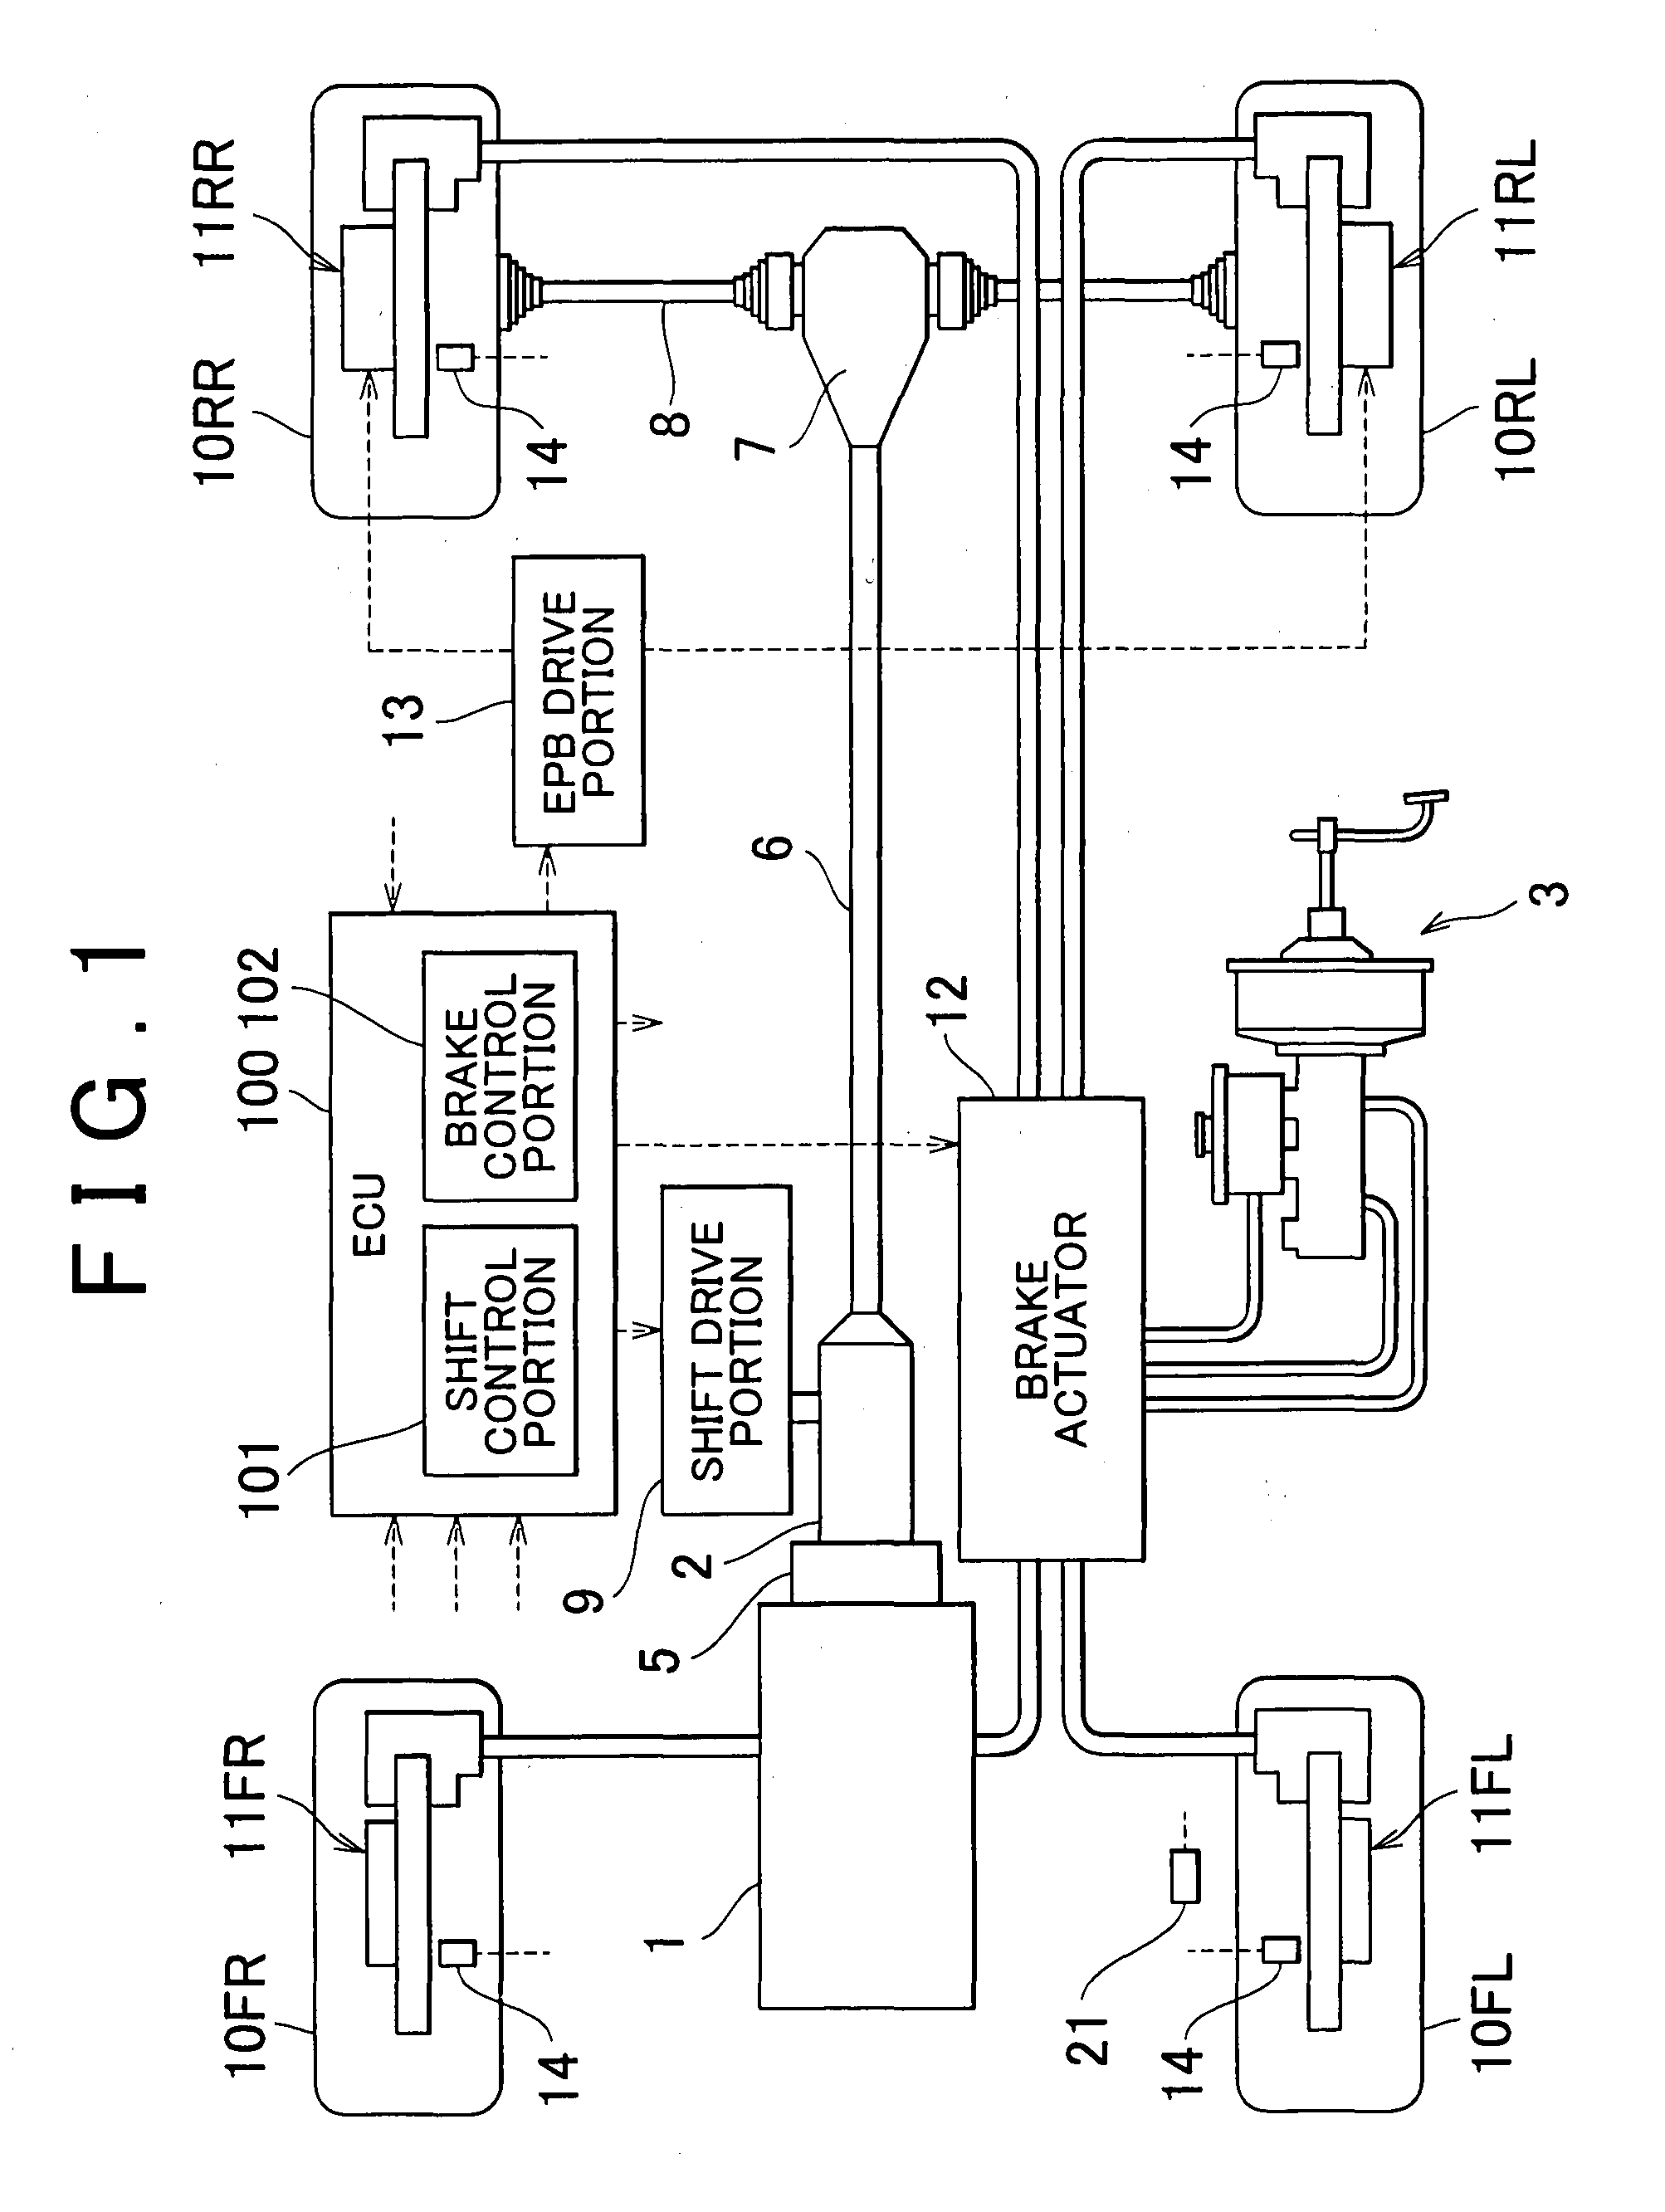 Shift control system and method